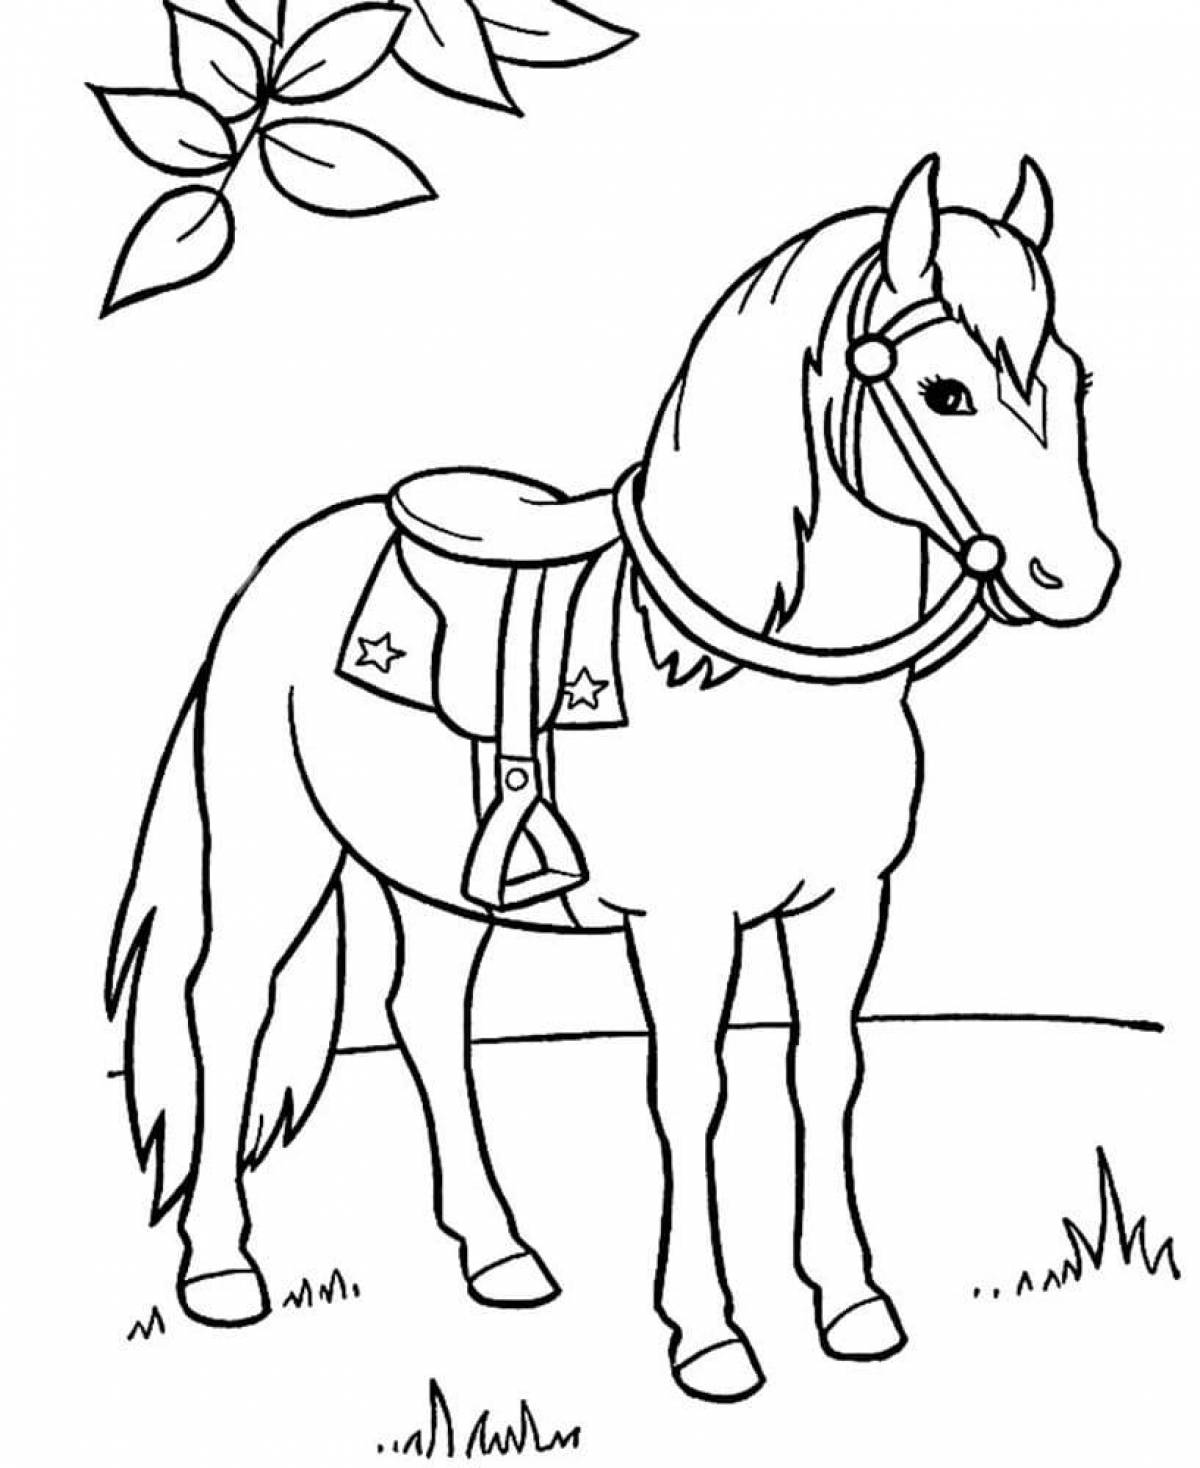 Charming skzoo coloring book